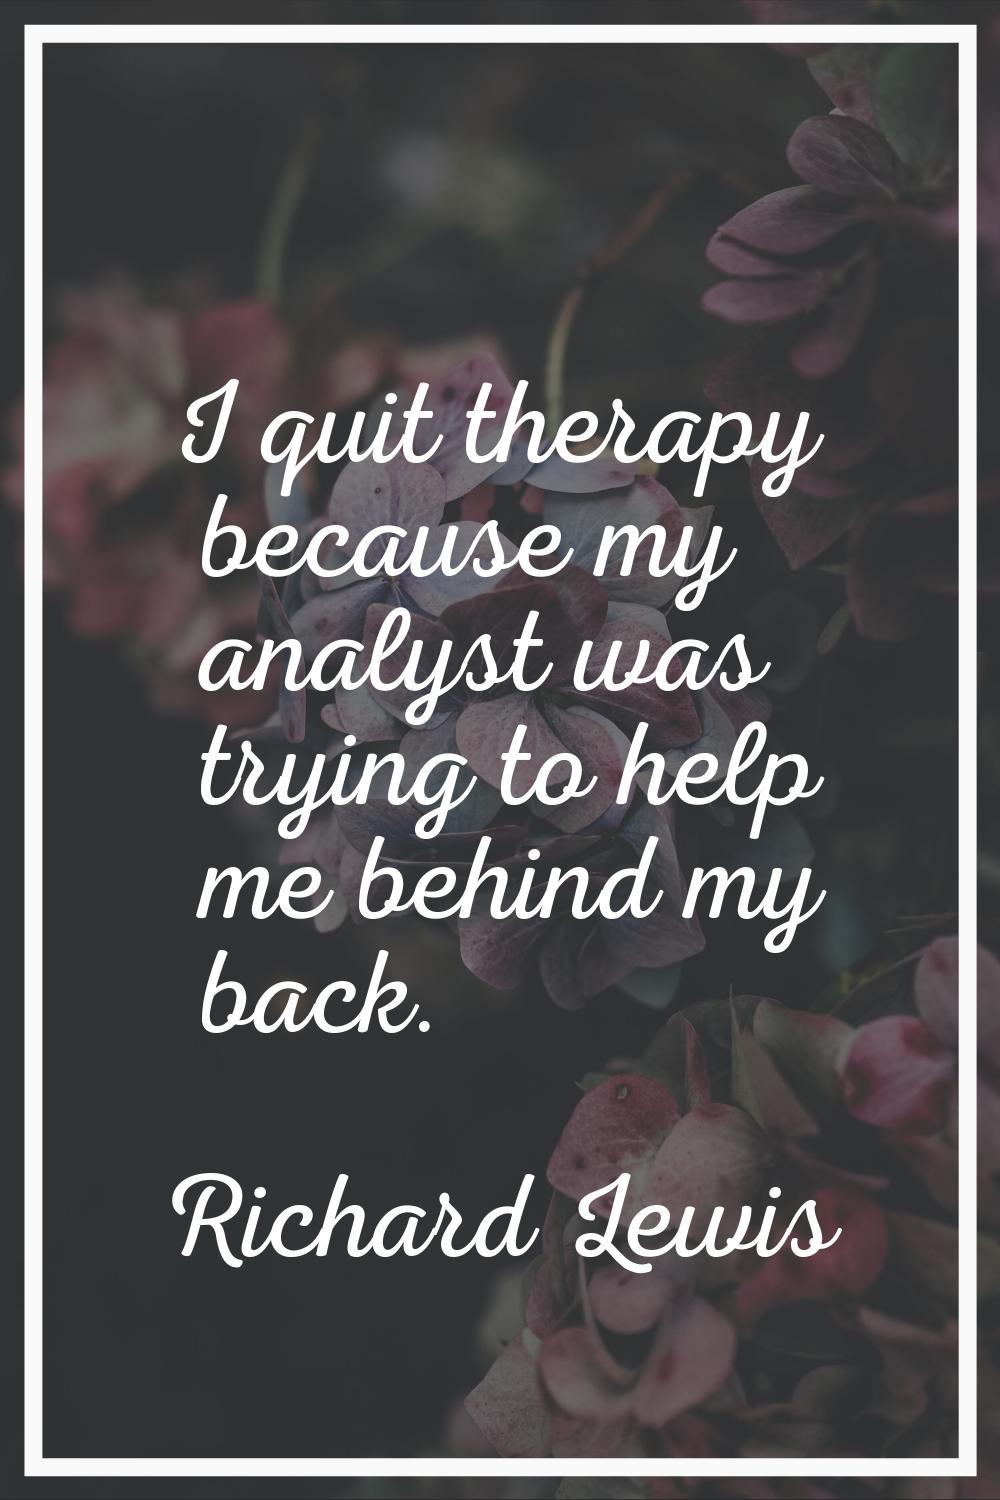 I quit therapy because my analyst was trying to help me behind my back.